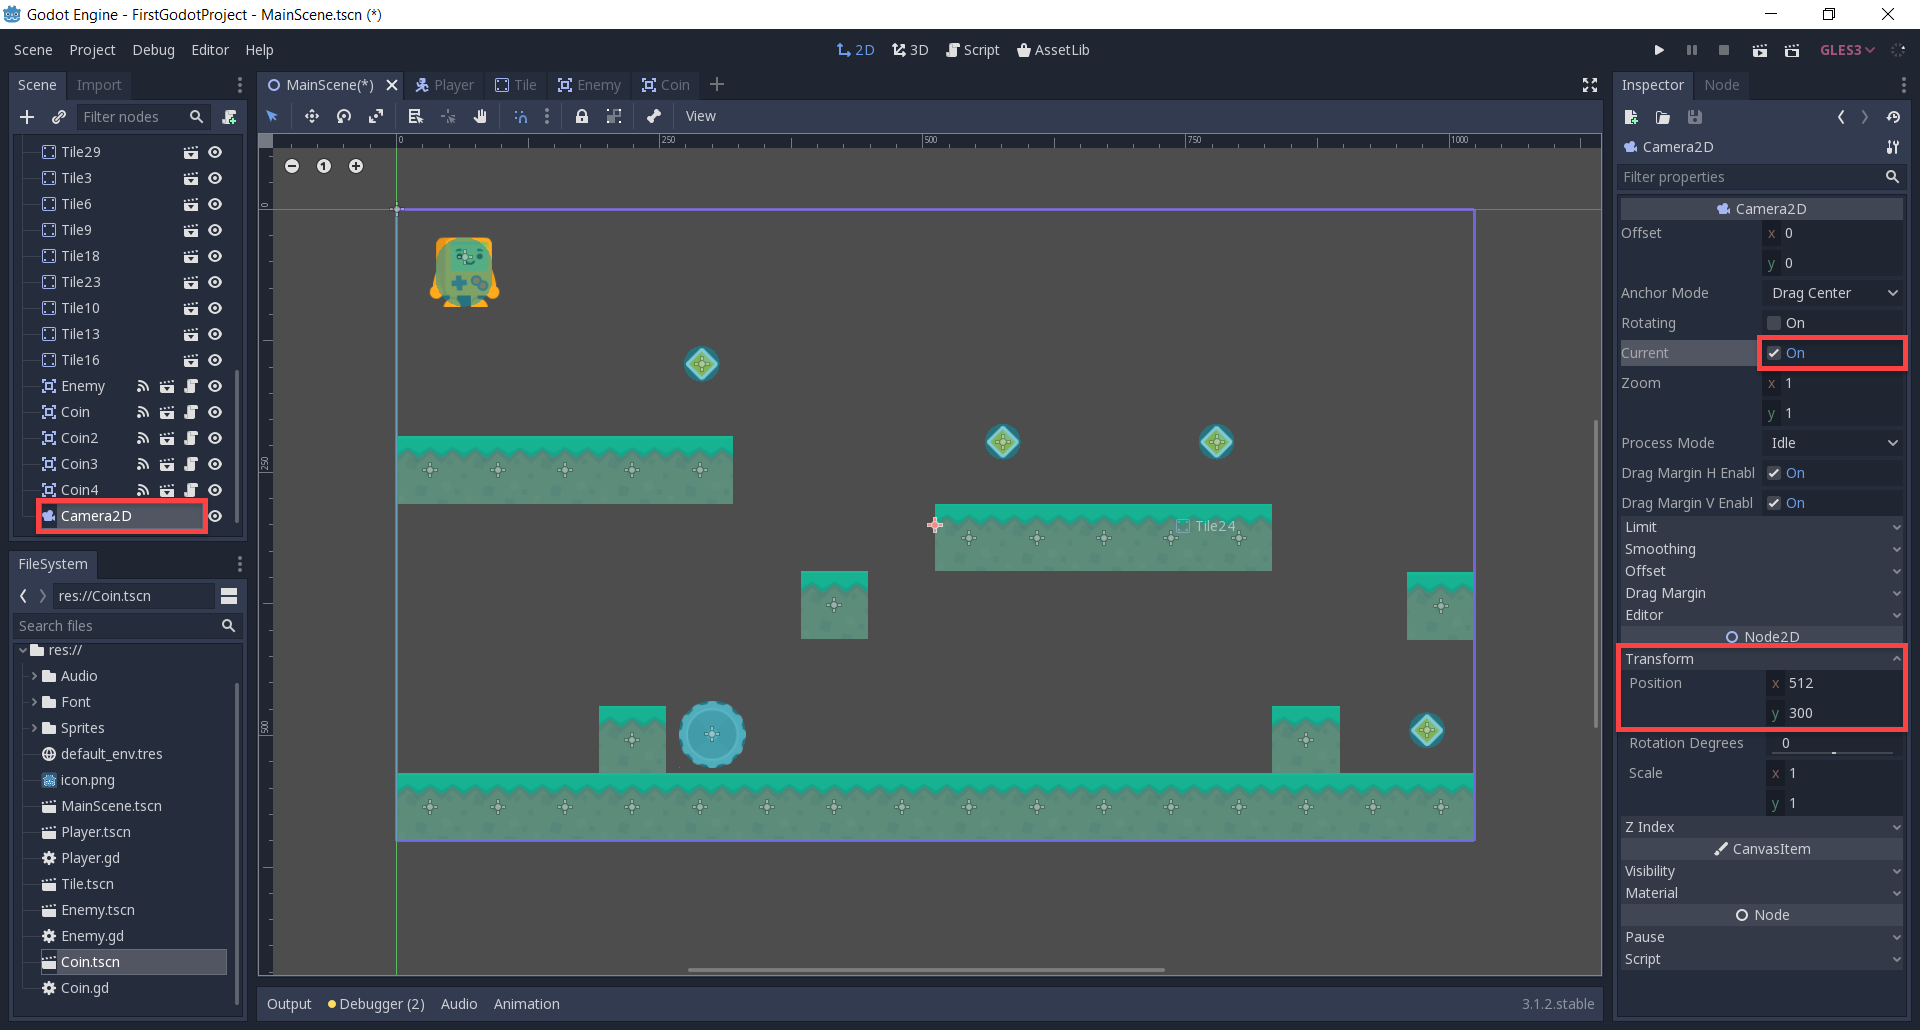 Godot with Camera2D selected and various properties highlighted